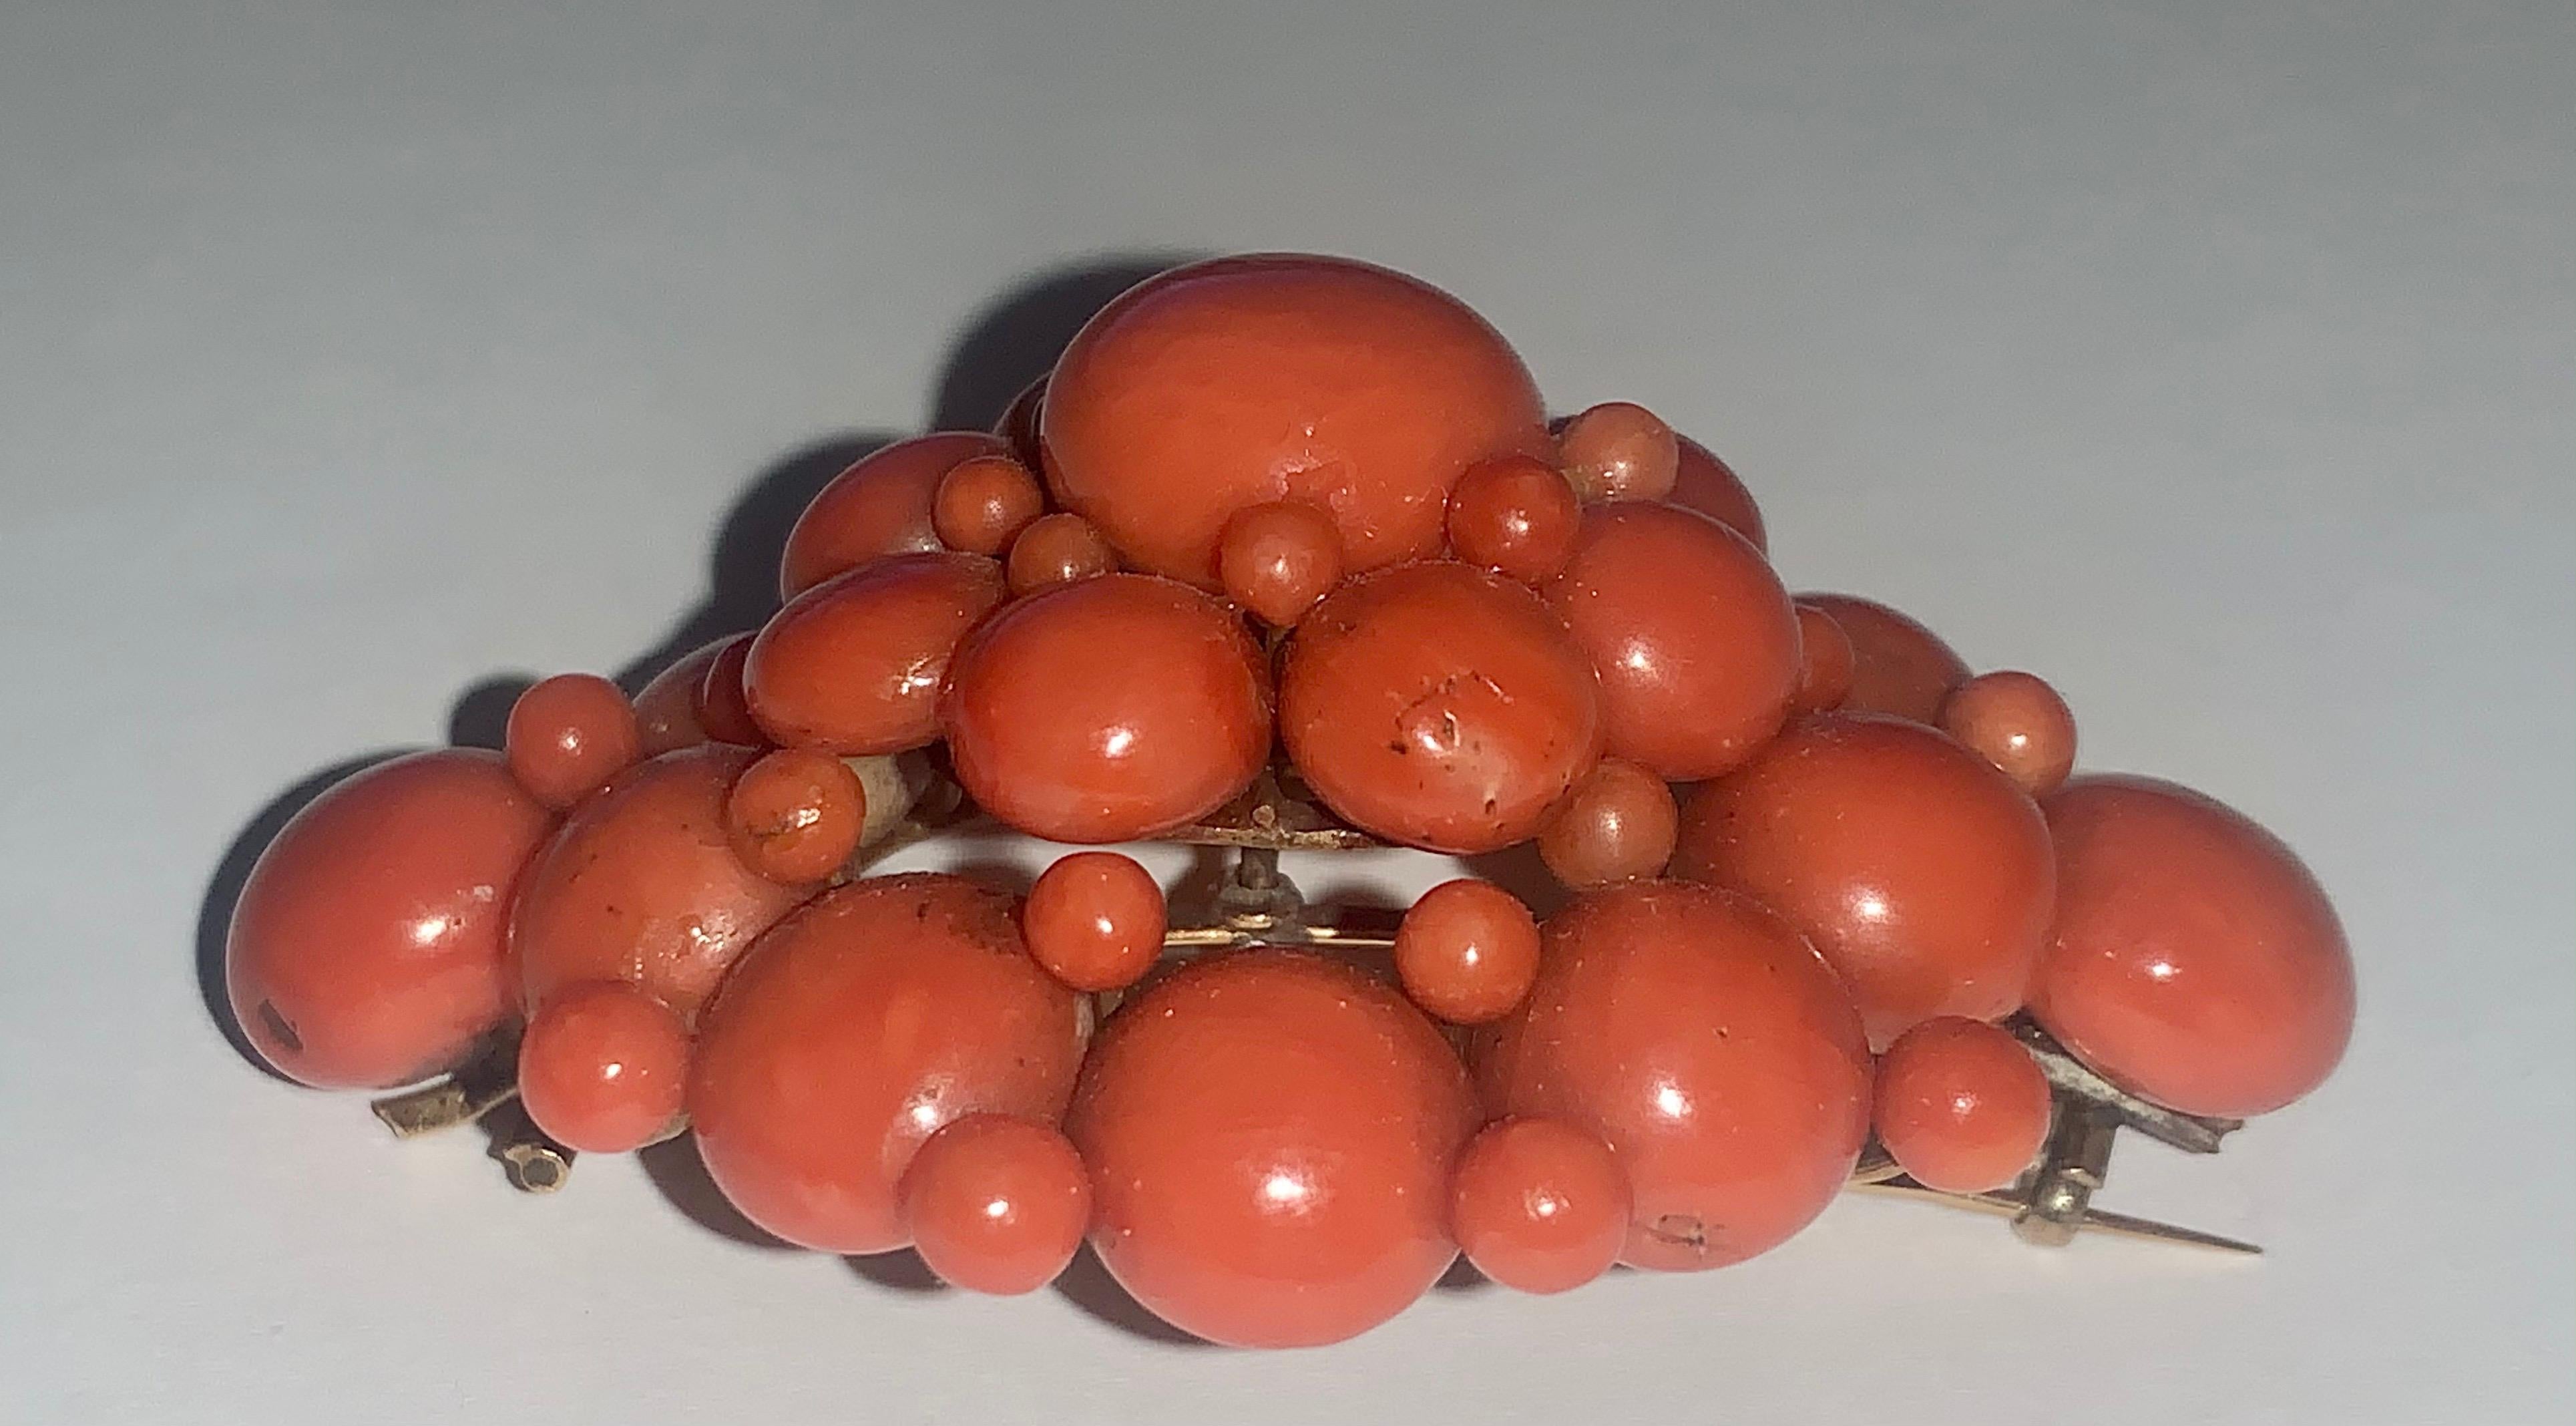 Beautiful large statement piece brooch from the late Victorian period consisting of 6 tiers of natural Mediterranean salmon coral beads with sizes ranging from 12mm to 4mm attached to a 15k gold backing. There are no missing beads in excellent